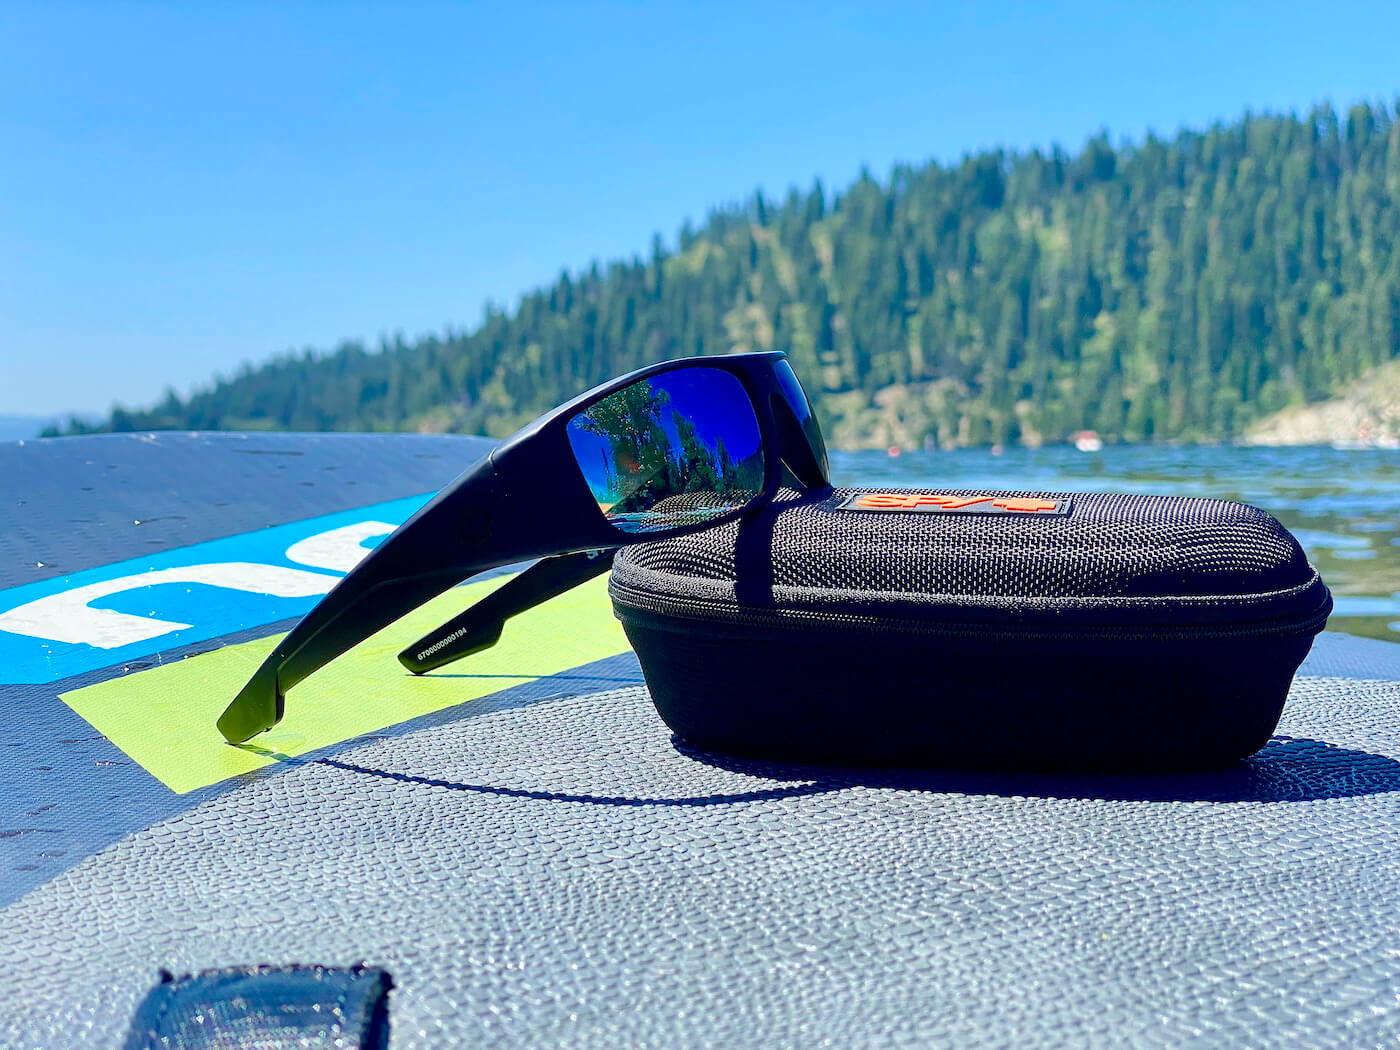 This photo shows the SPY+ Logan sunglasses with Happy Boost lens technology outside on an iSUP paddleboard on a lake.